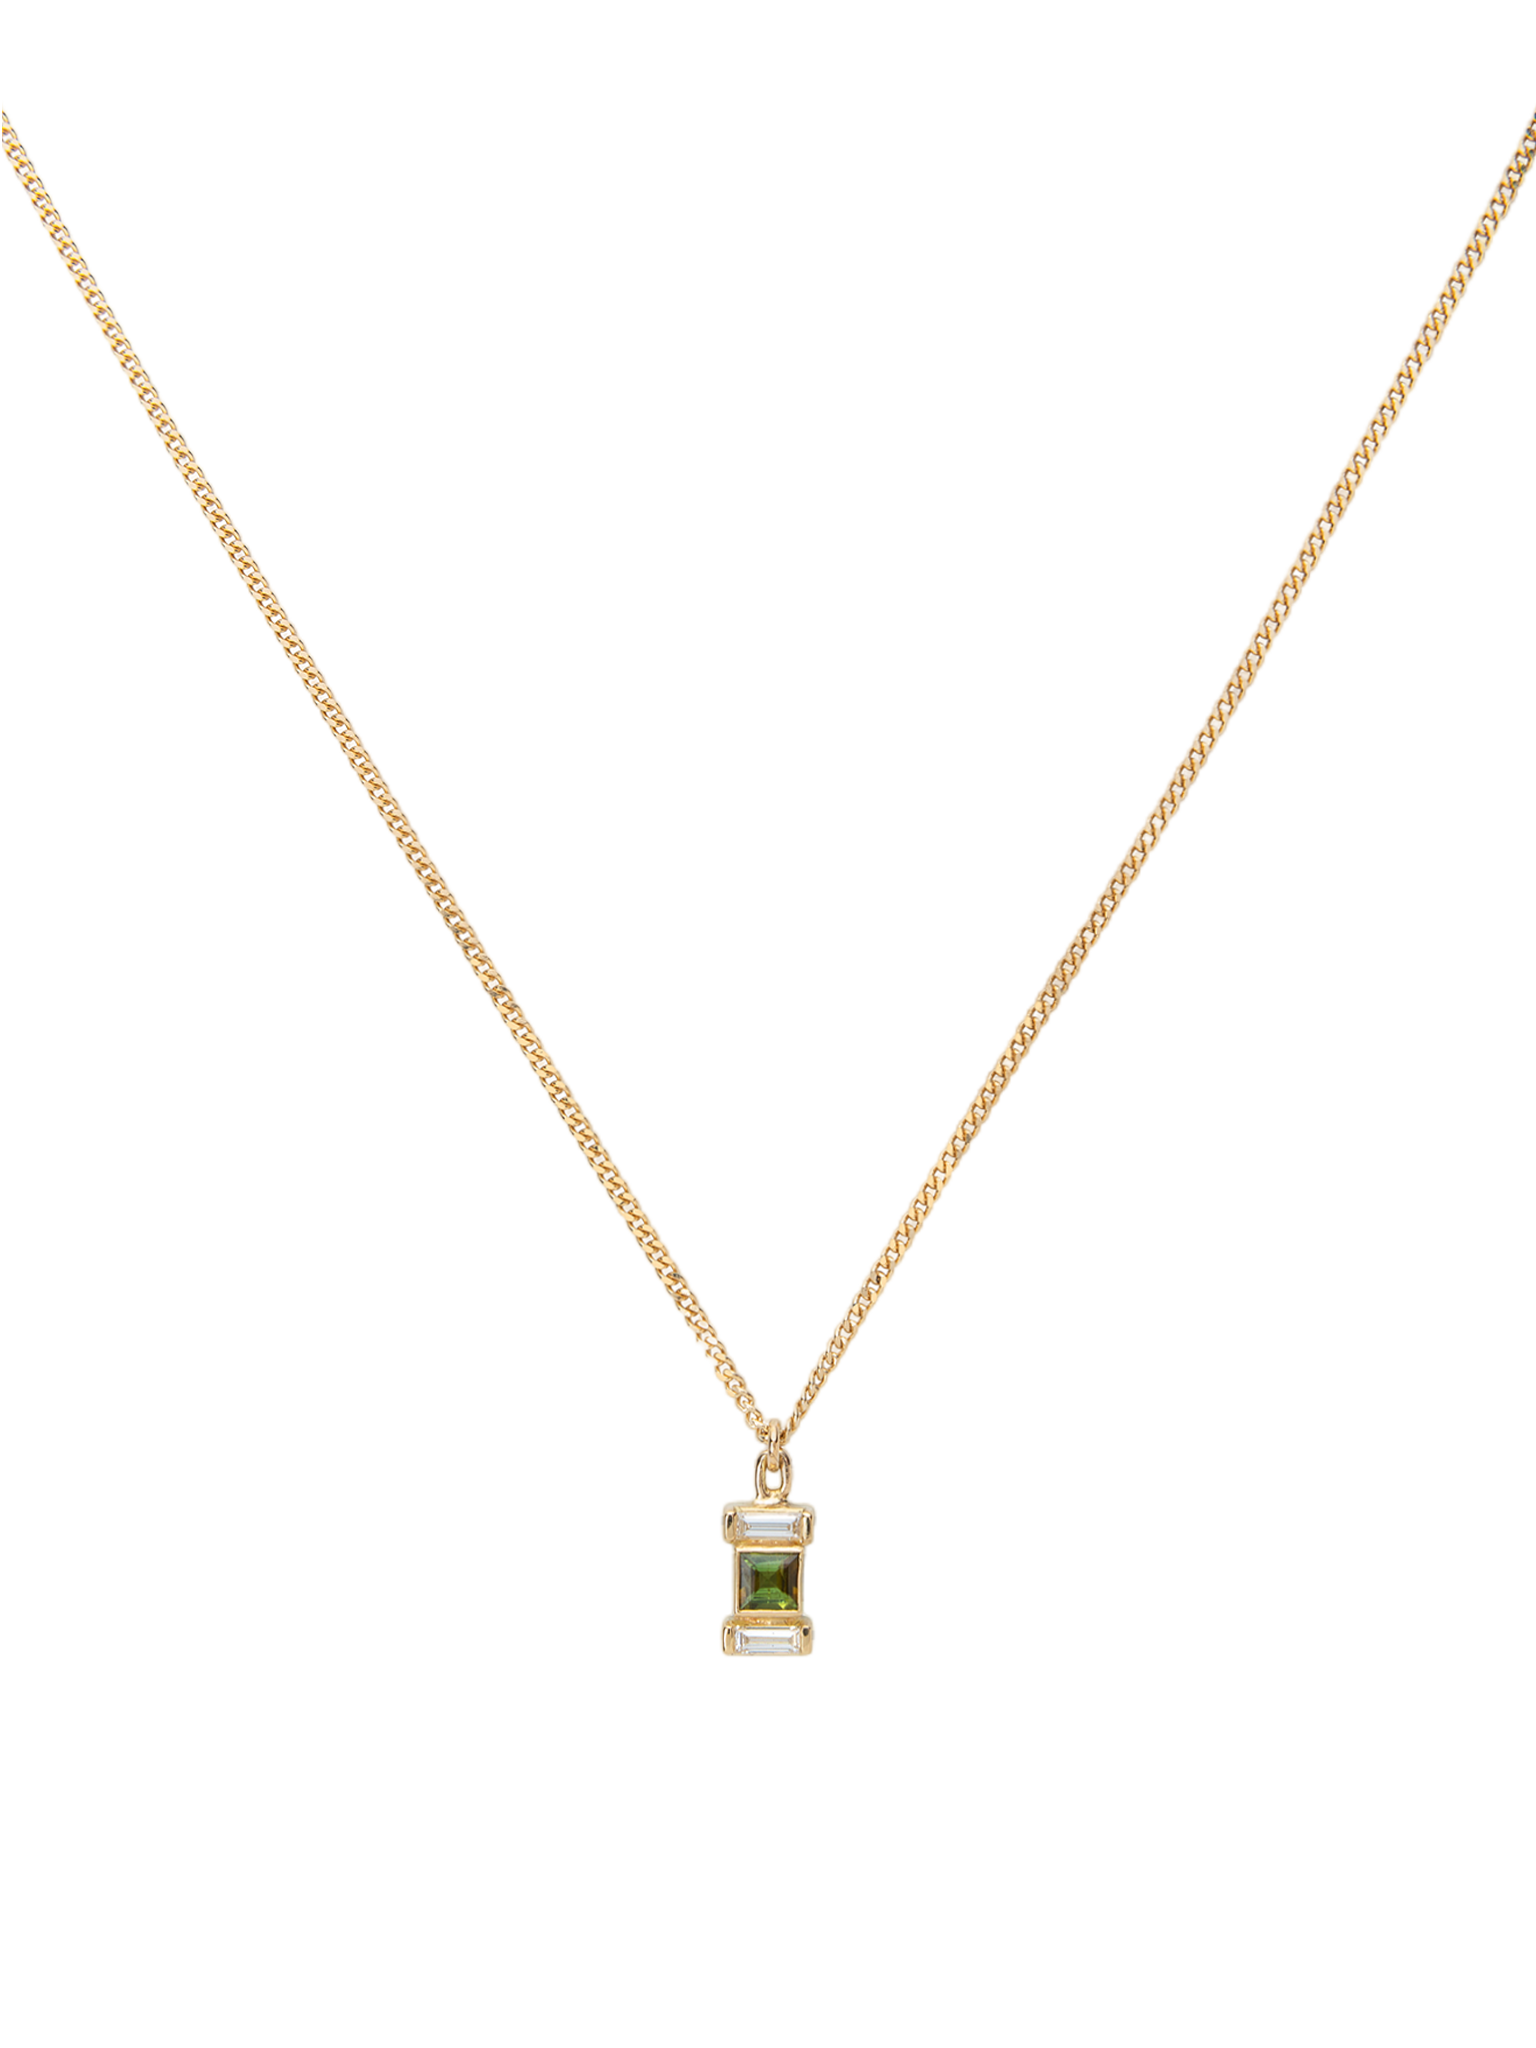 The sanrekhit necklace 